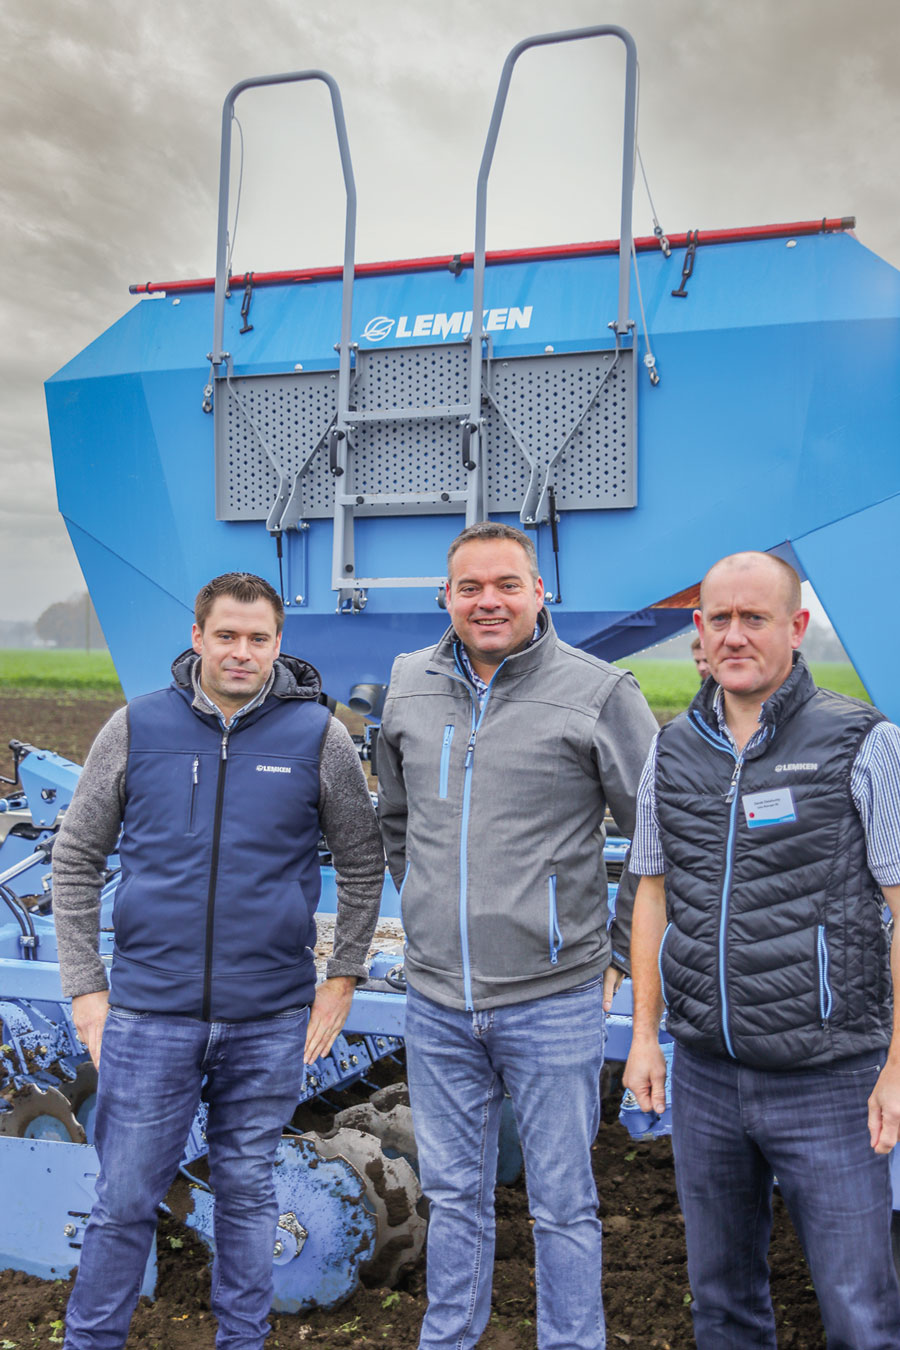 New options for cultivations and drilling